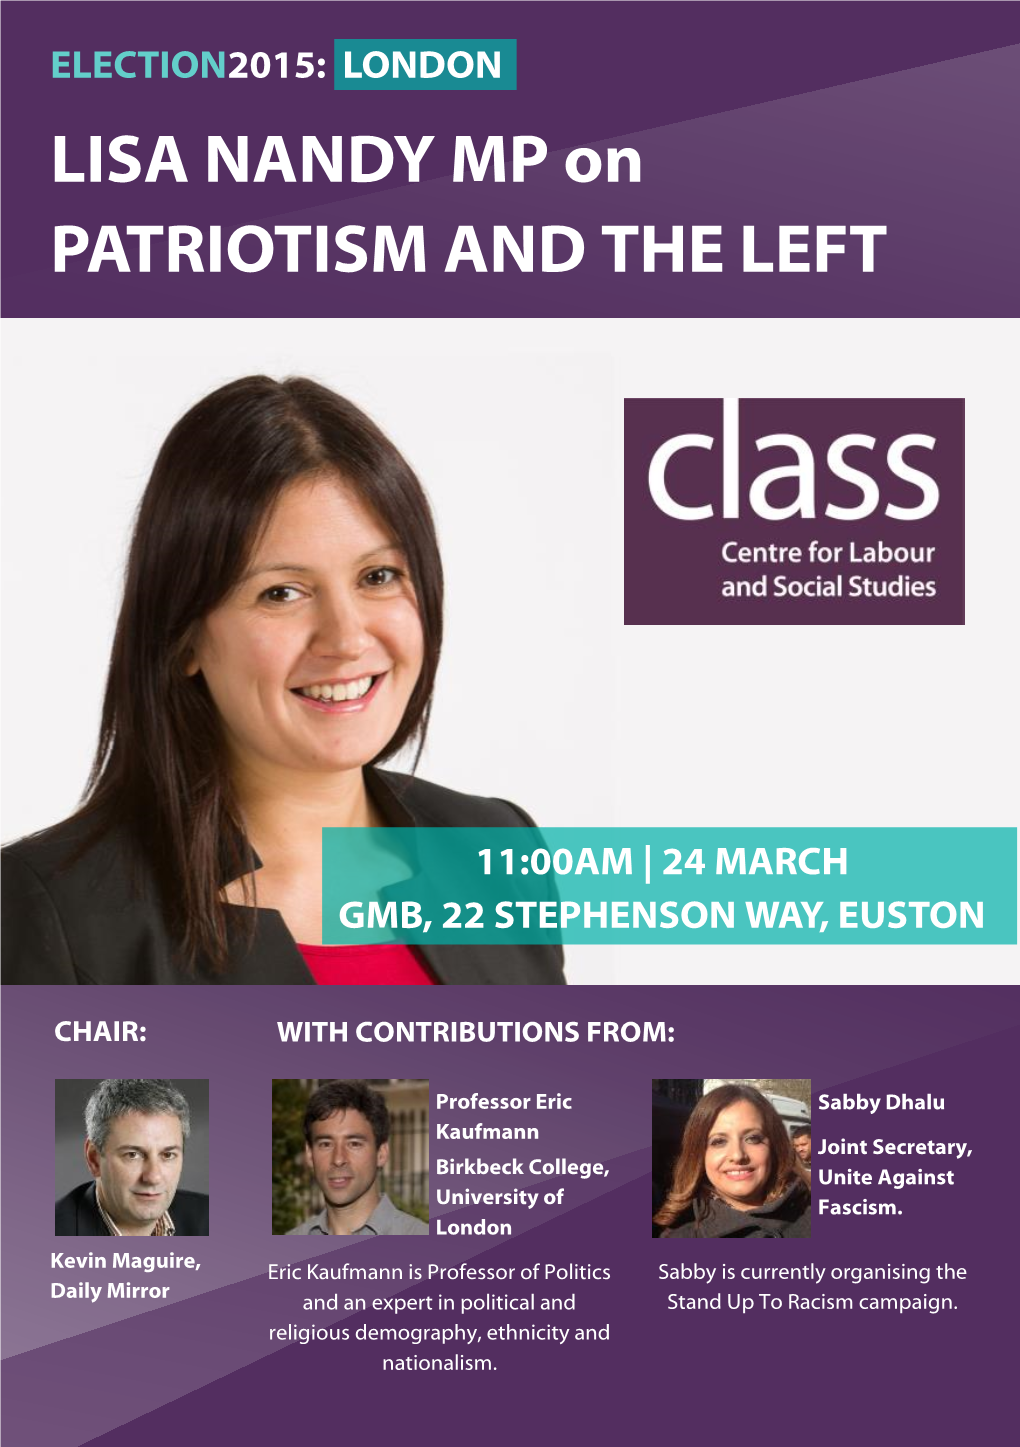 LISA NANDY MP on PATRIOTISM and the LEFT 11:00AM | TUESDAY 24 MARCH GMB, 22 STEPHENSON WAY, EUSTON, LONDON NW1 2HD